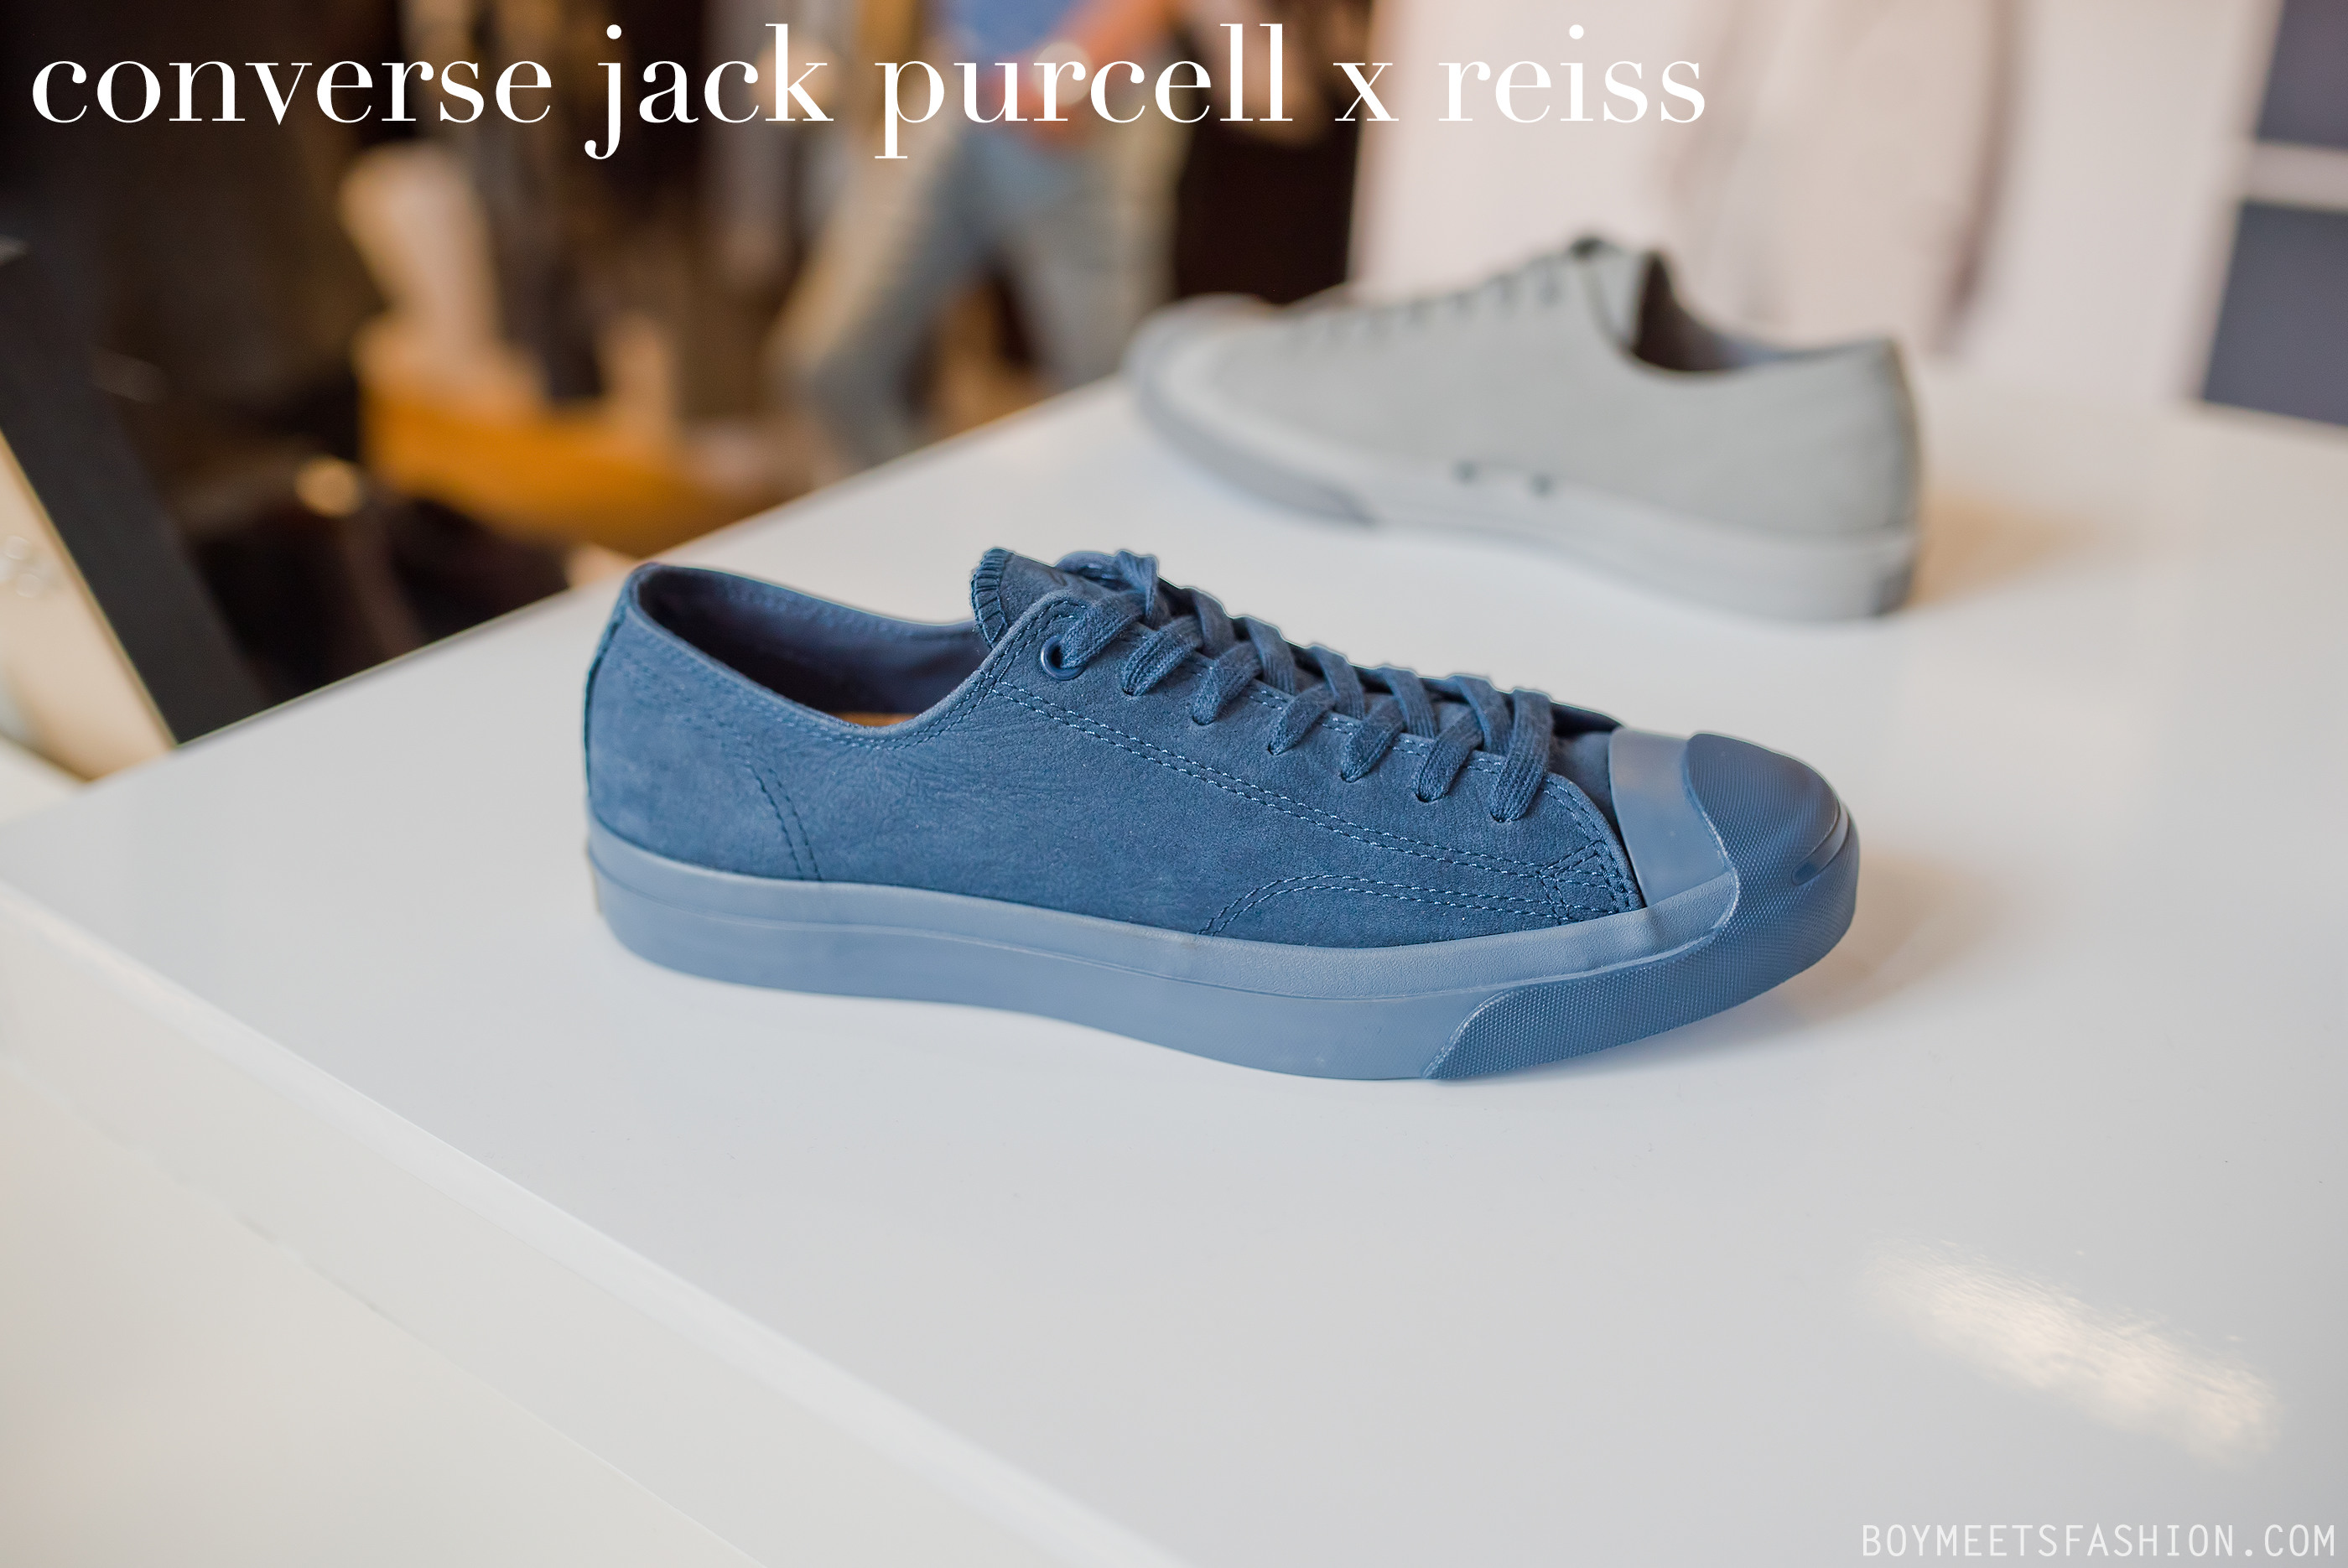 Shoe of the day: Jack Purcell x REISS | Meets Fashion – the style blog for men and women